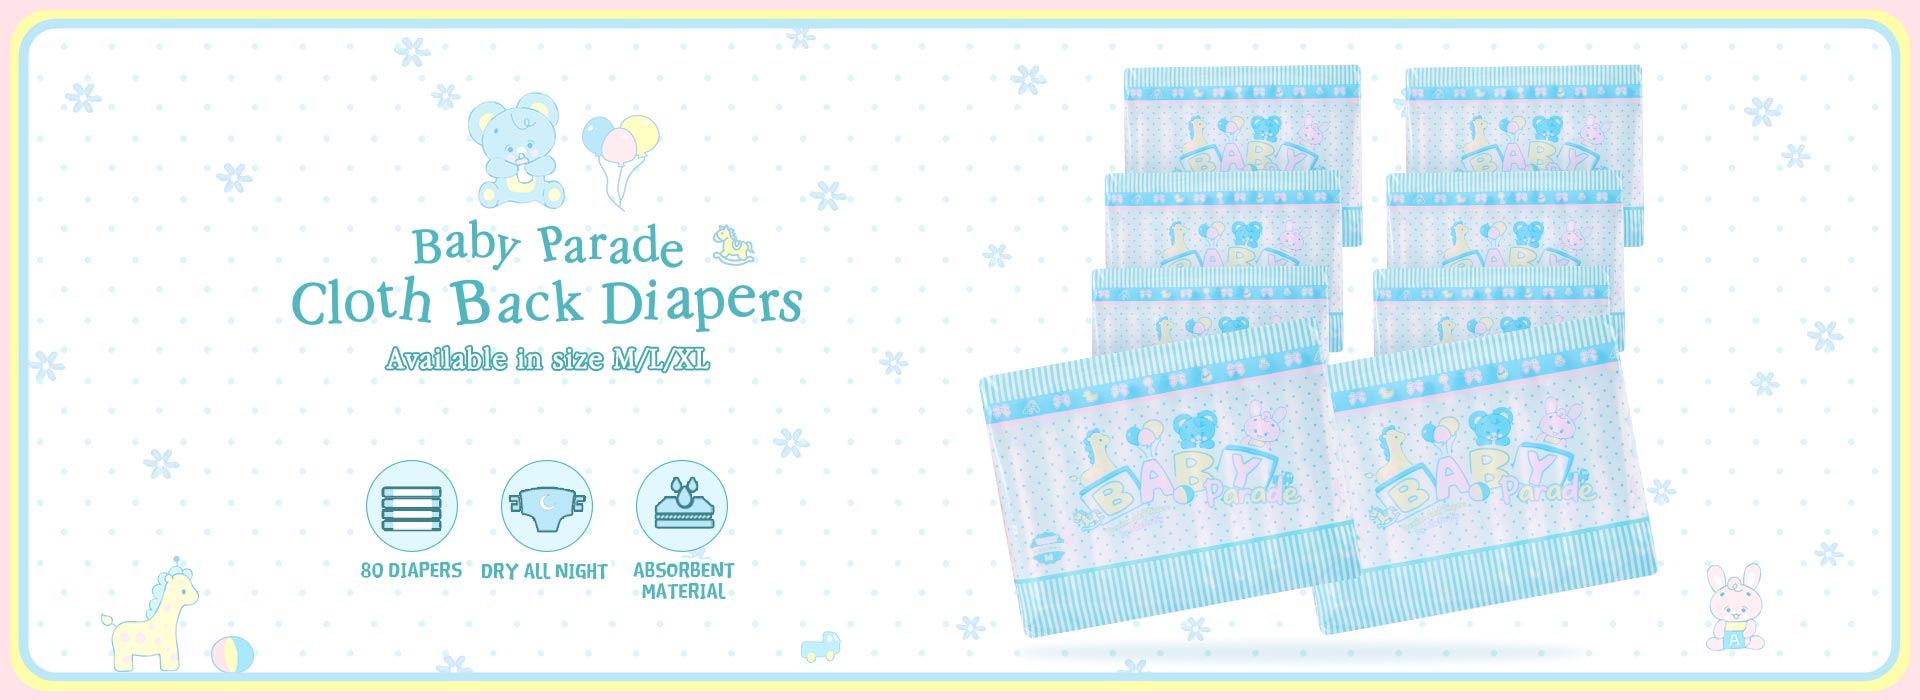 LittleForBig - Adult Diapers&Ageplay products